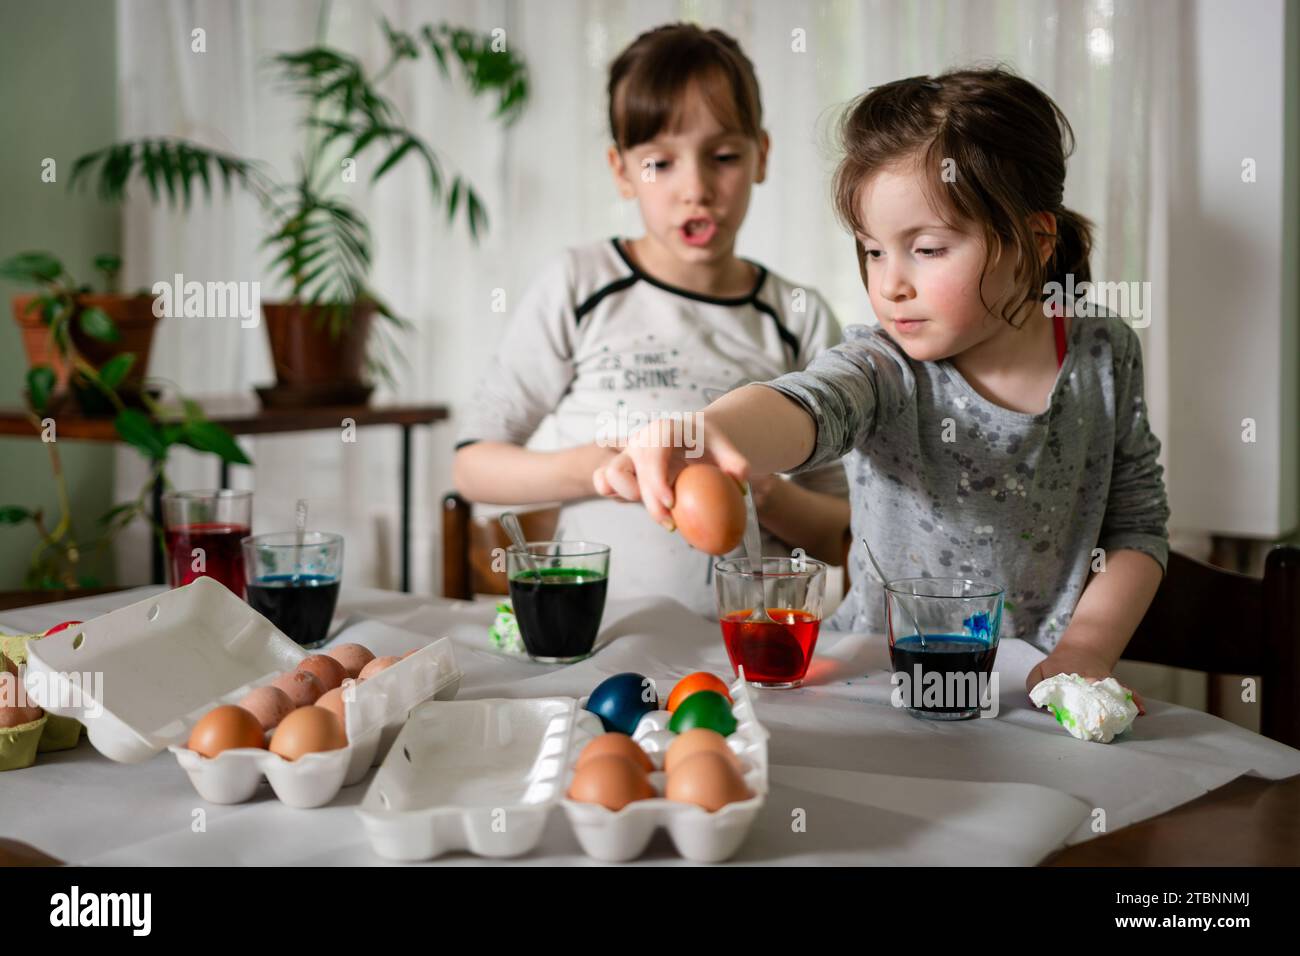 Toddler painting at home Stock Photo - Alamy